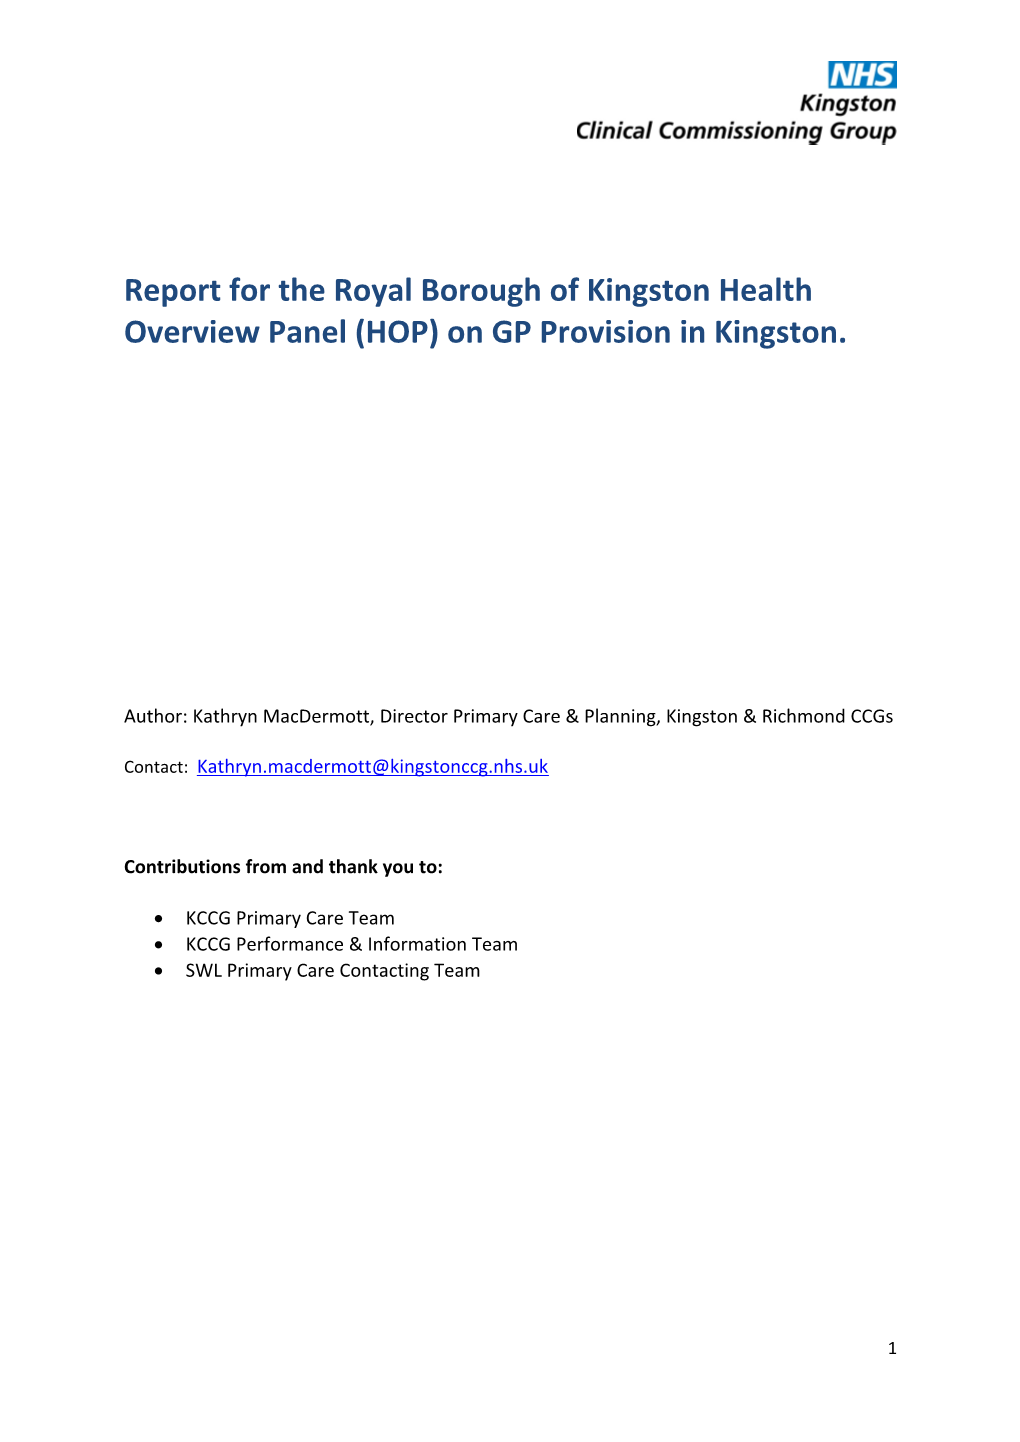 On GP Provision in Kingston